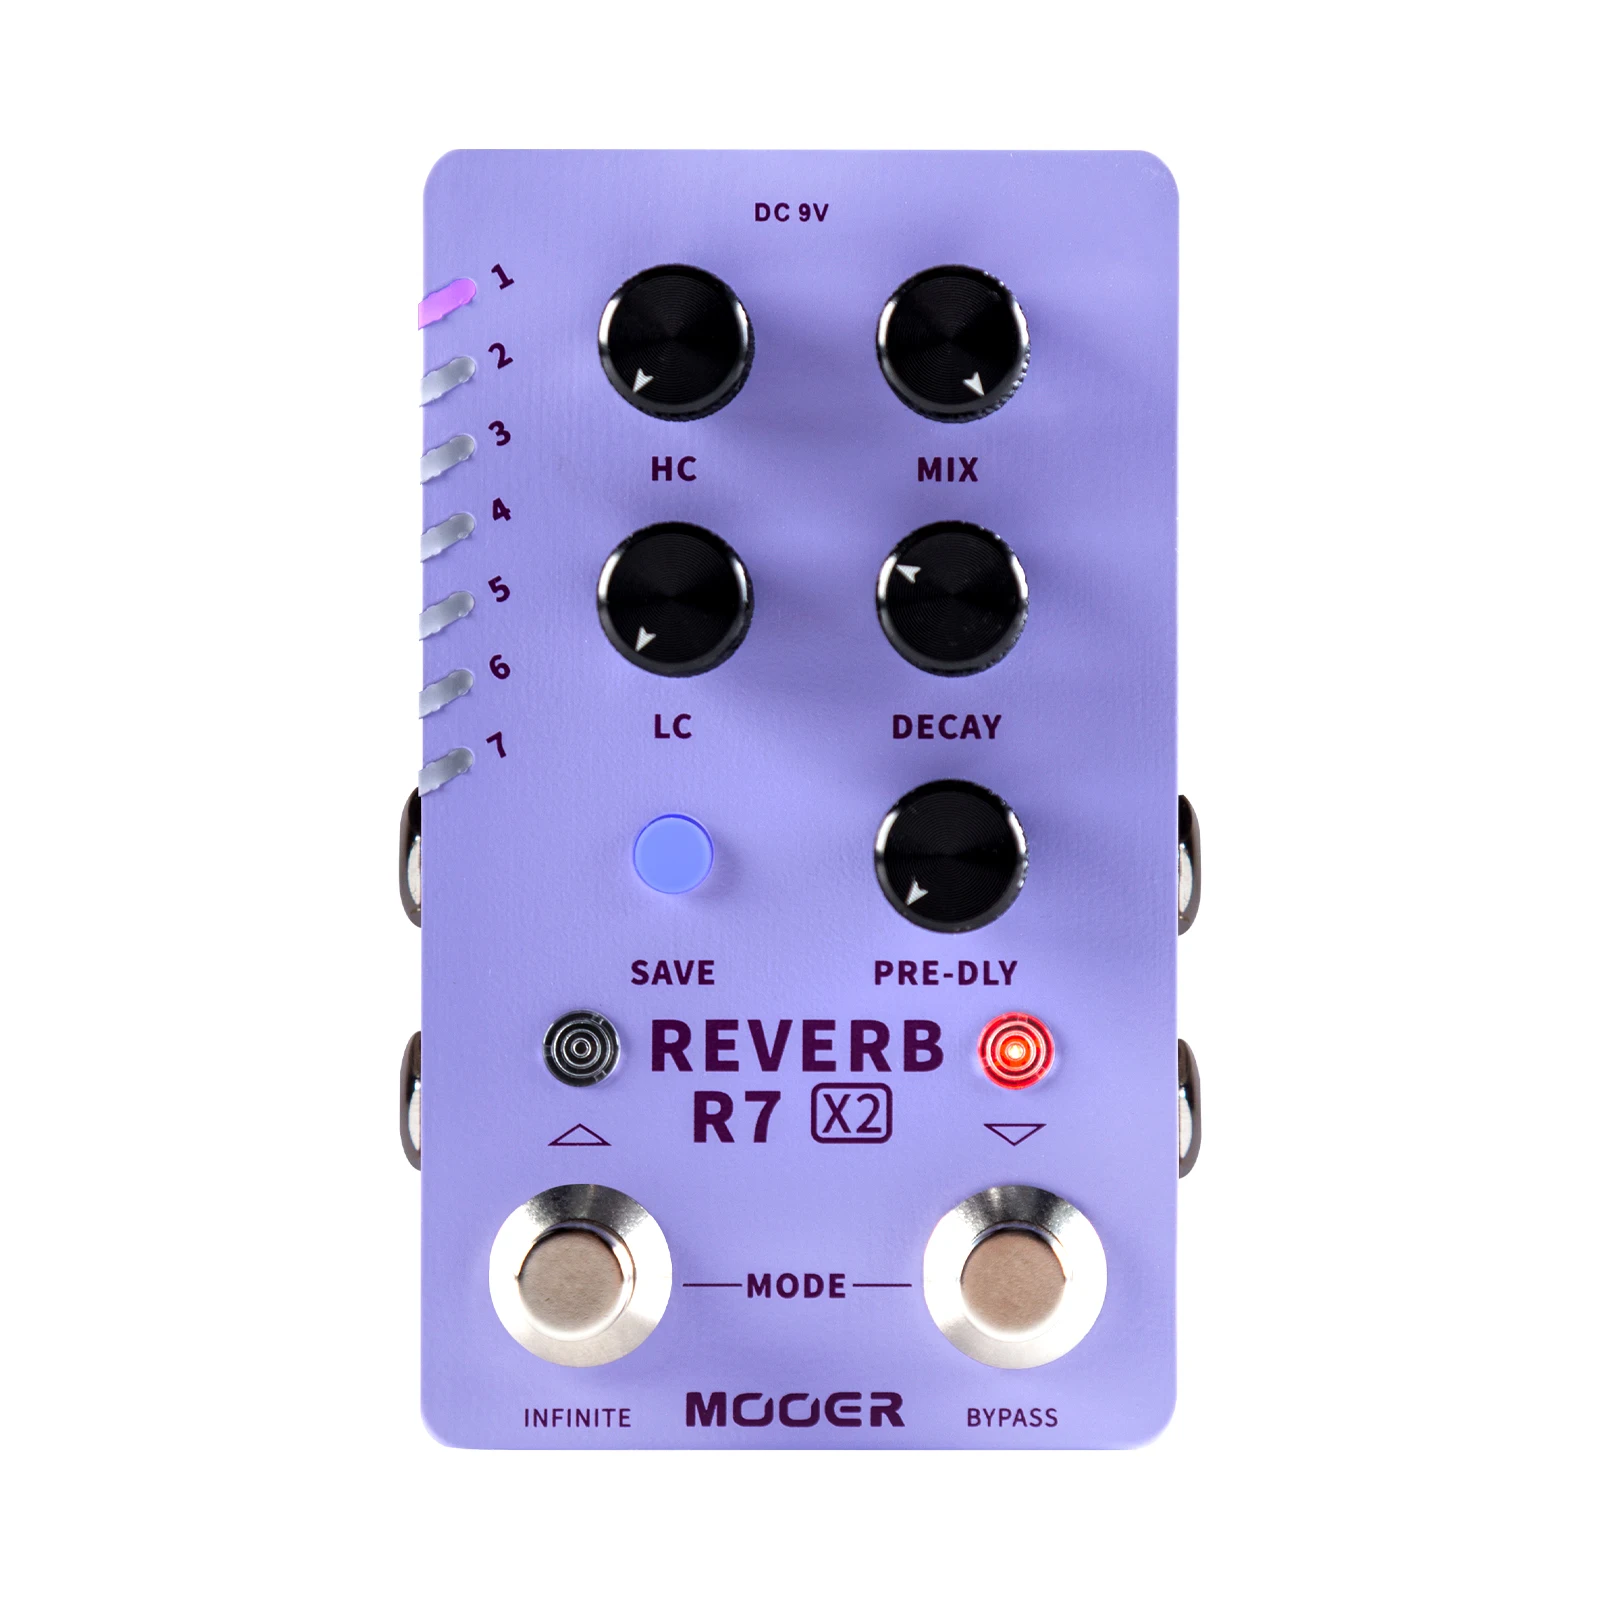 

MOOER R7 X2 Reverb Guitar Pedal Dual Footswitch Stereo Reverb Pedal Effect with 14 Built-in Different Reverbs Effects